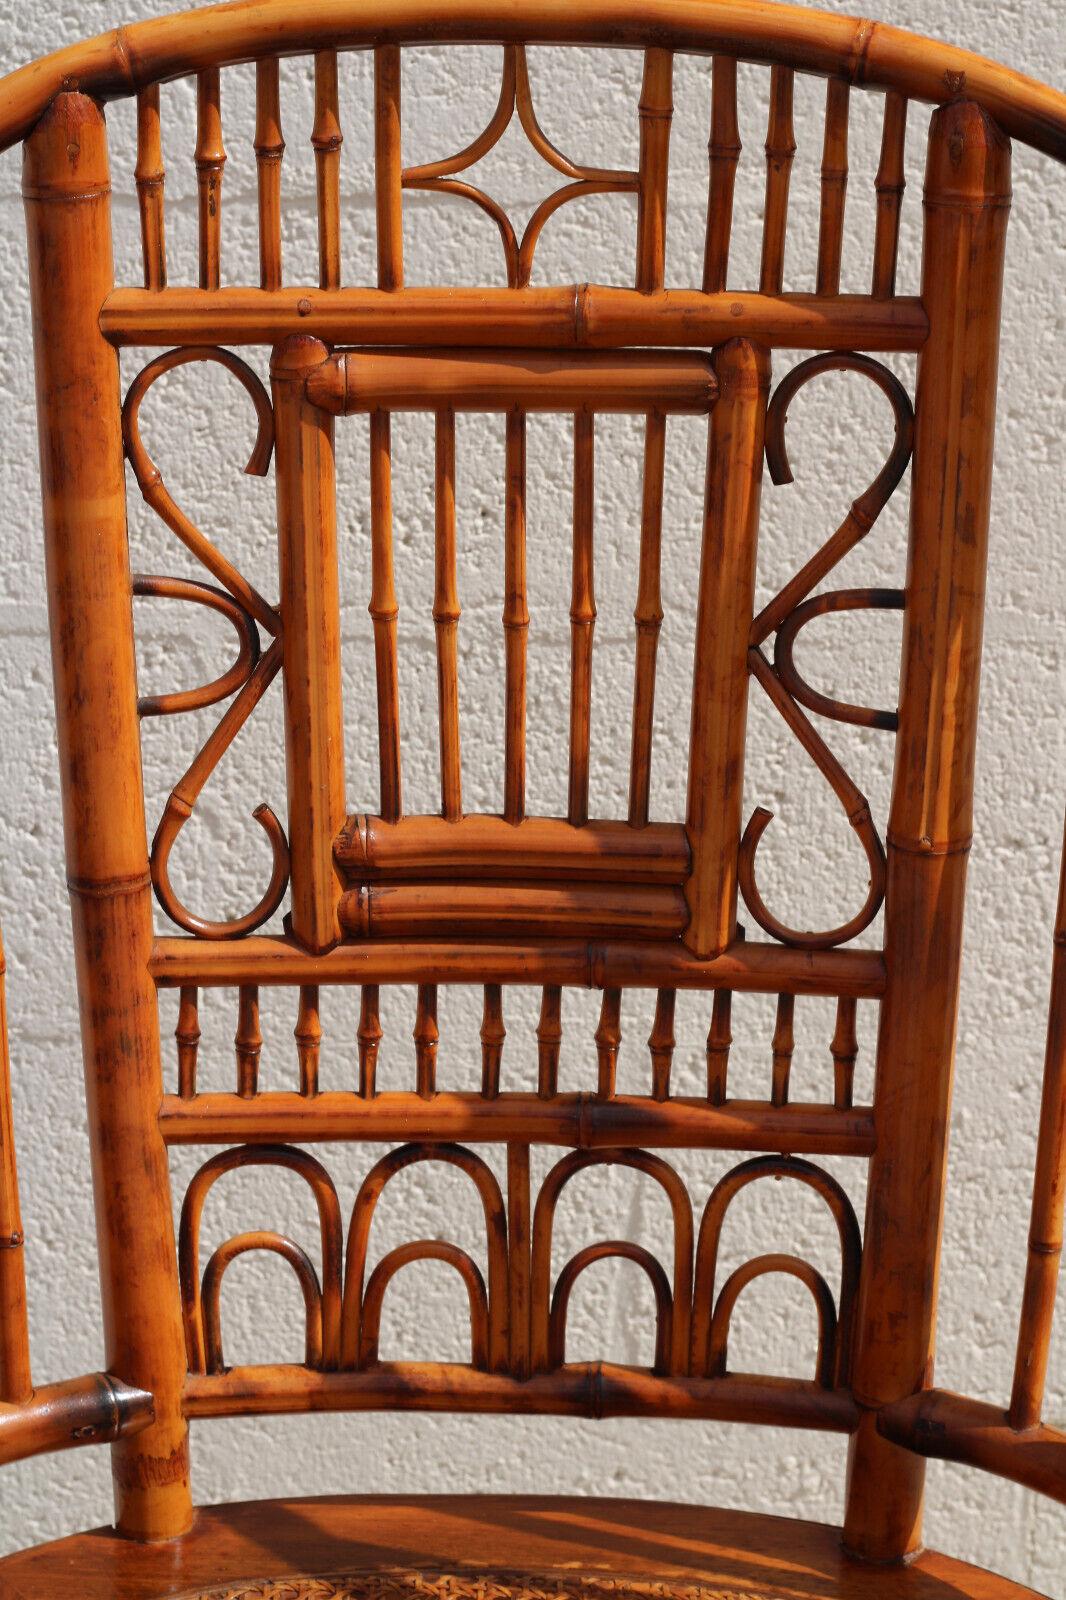 High Back Brighton Pavilion Style Tortoiseshell Bamboo Cane Armchairs, a Pair In Good Condition For Sale In Vero Beach, FL